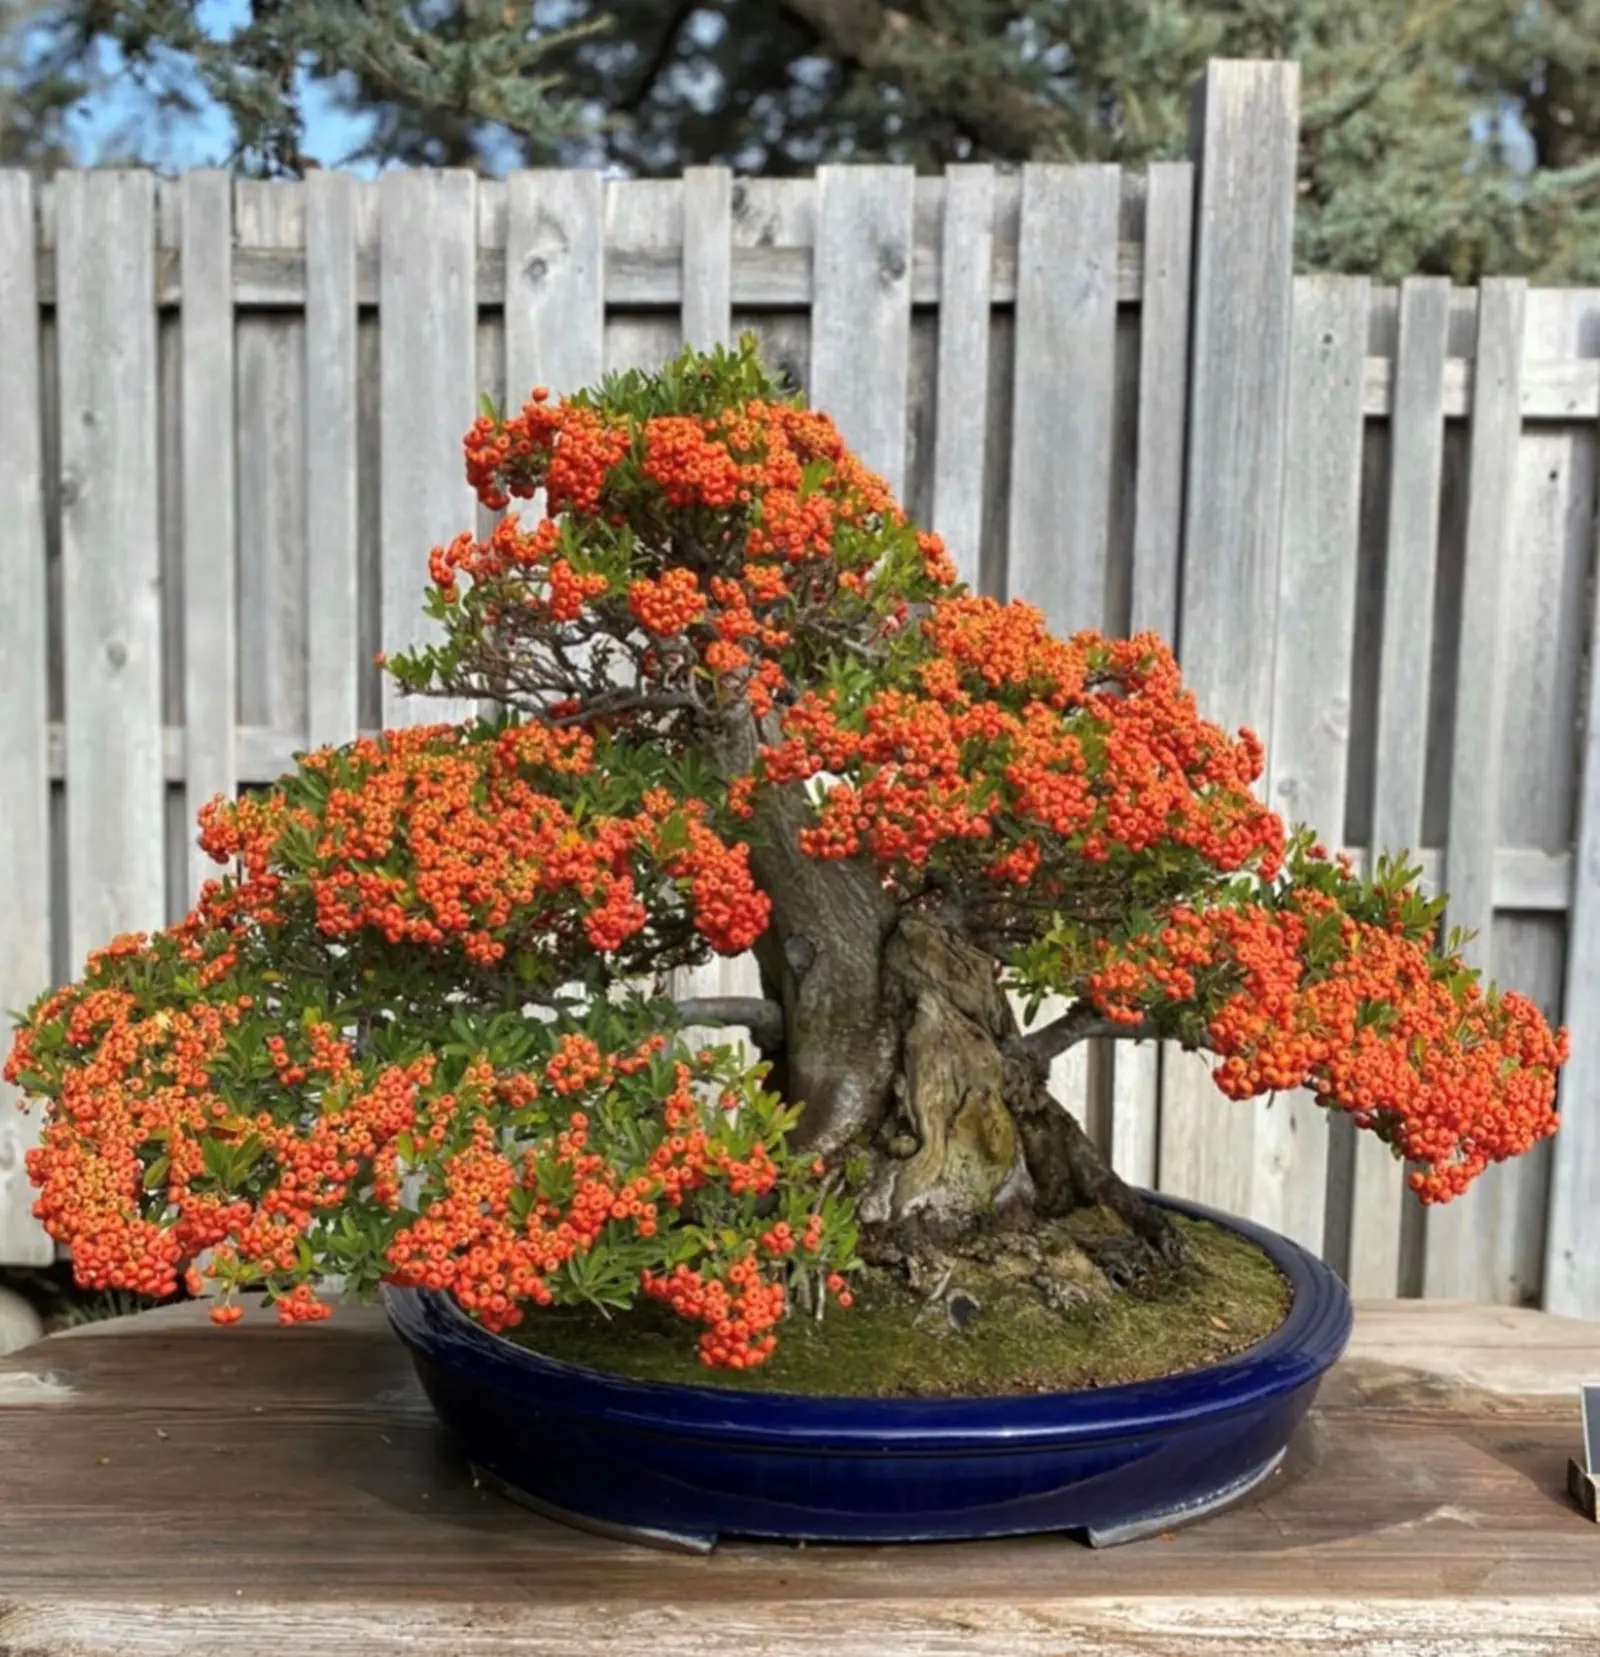 Pyracantha Bonsai with orange flowers in a small blue pot.